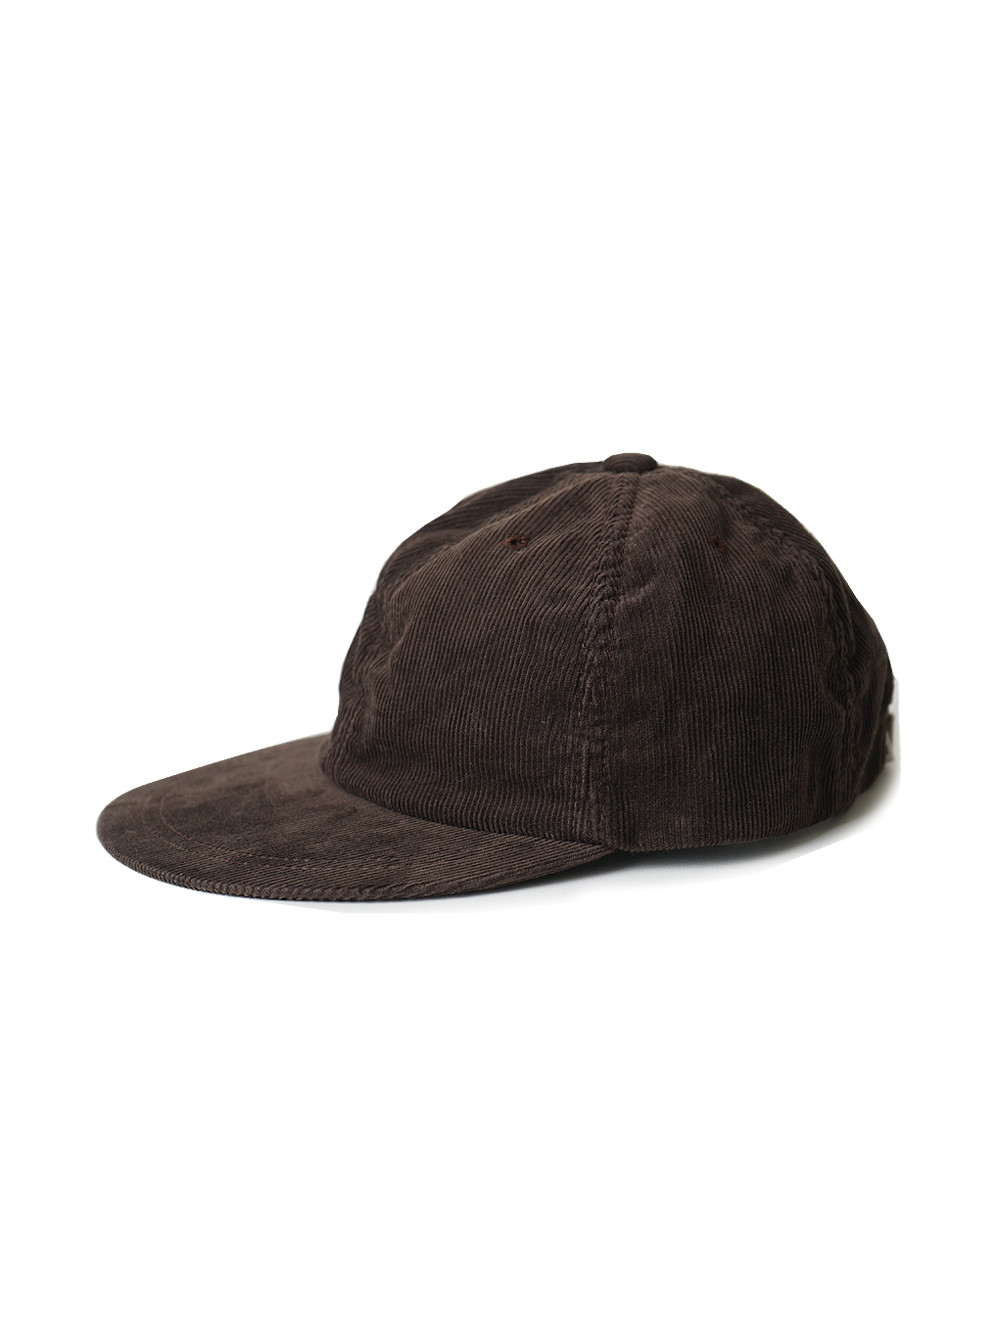 ENDS and MEANS cord 6panels cap (brown)